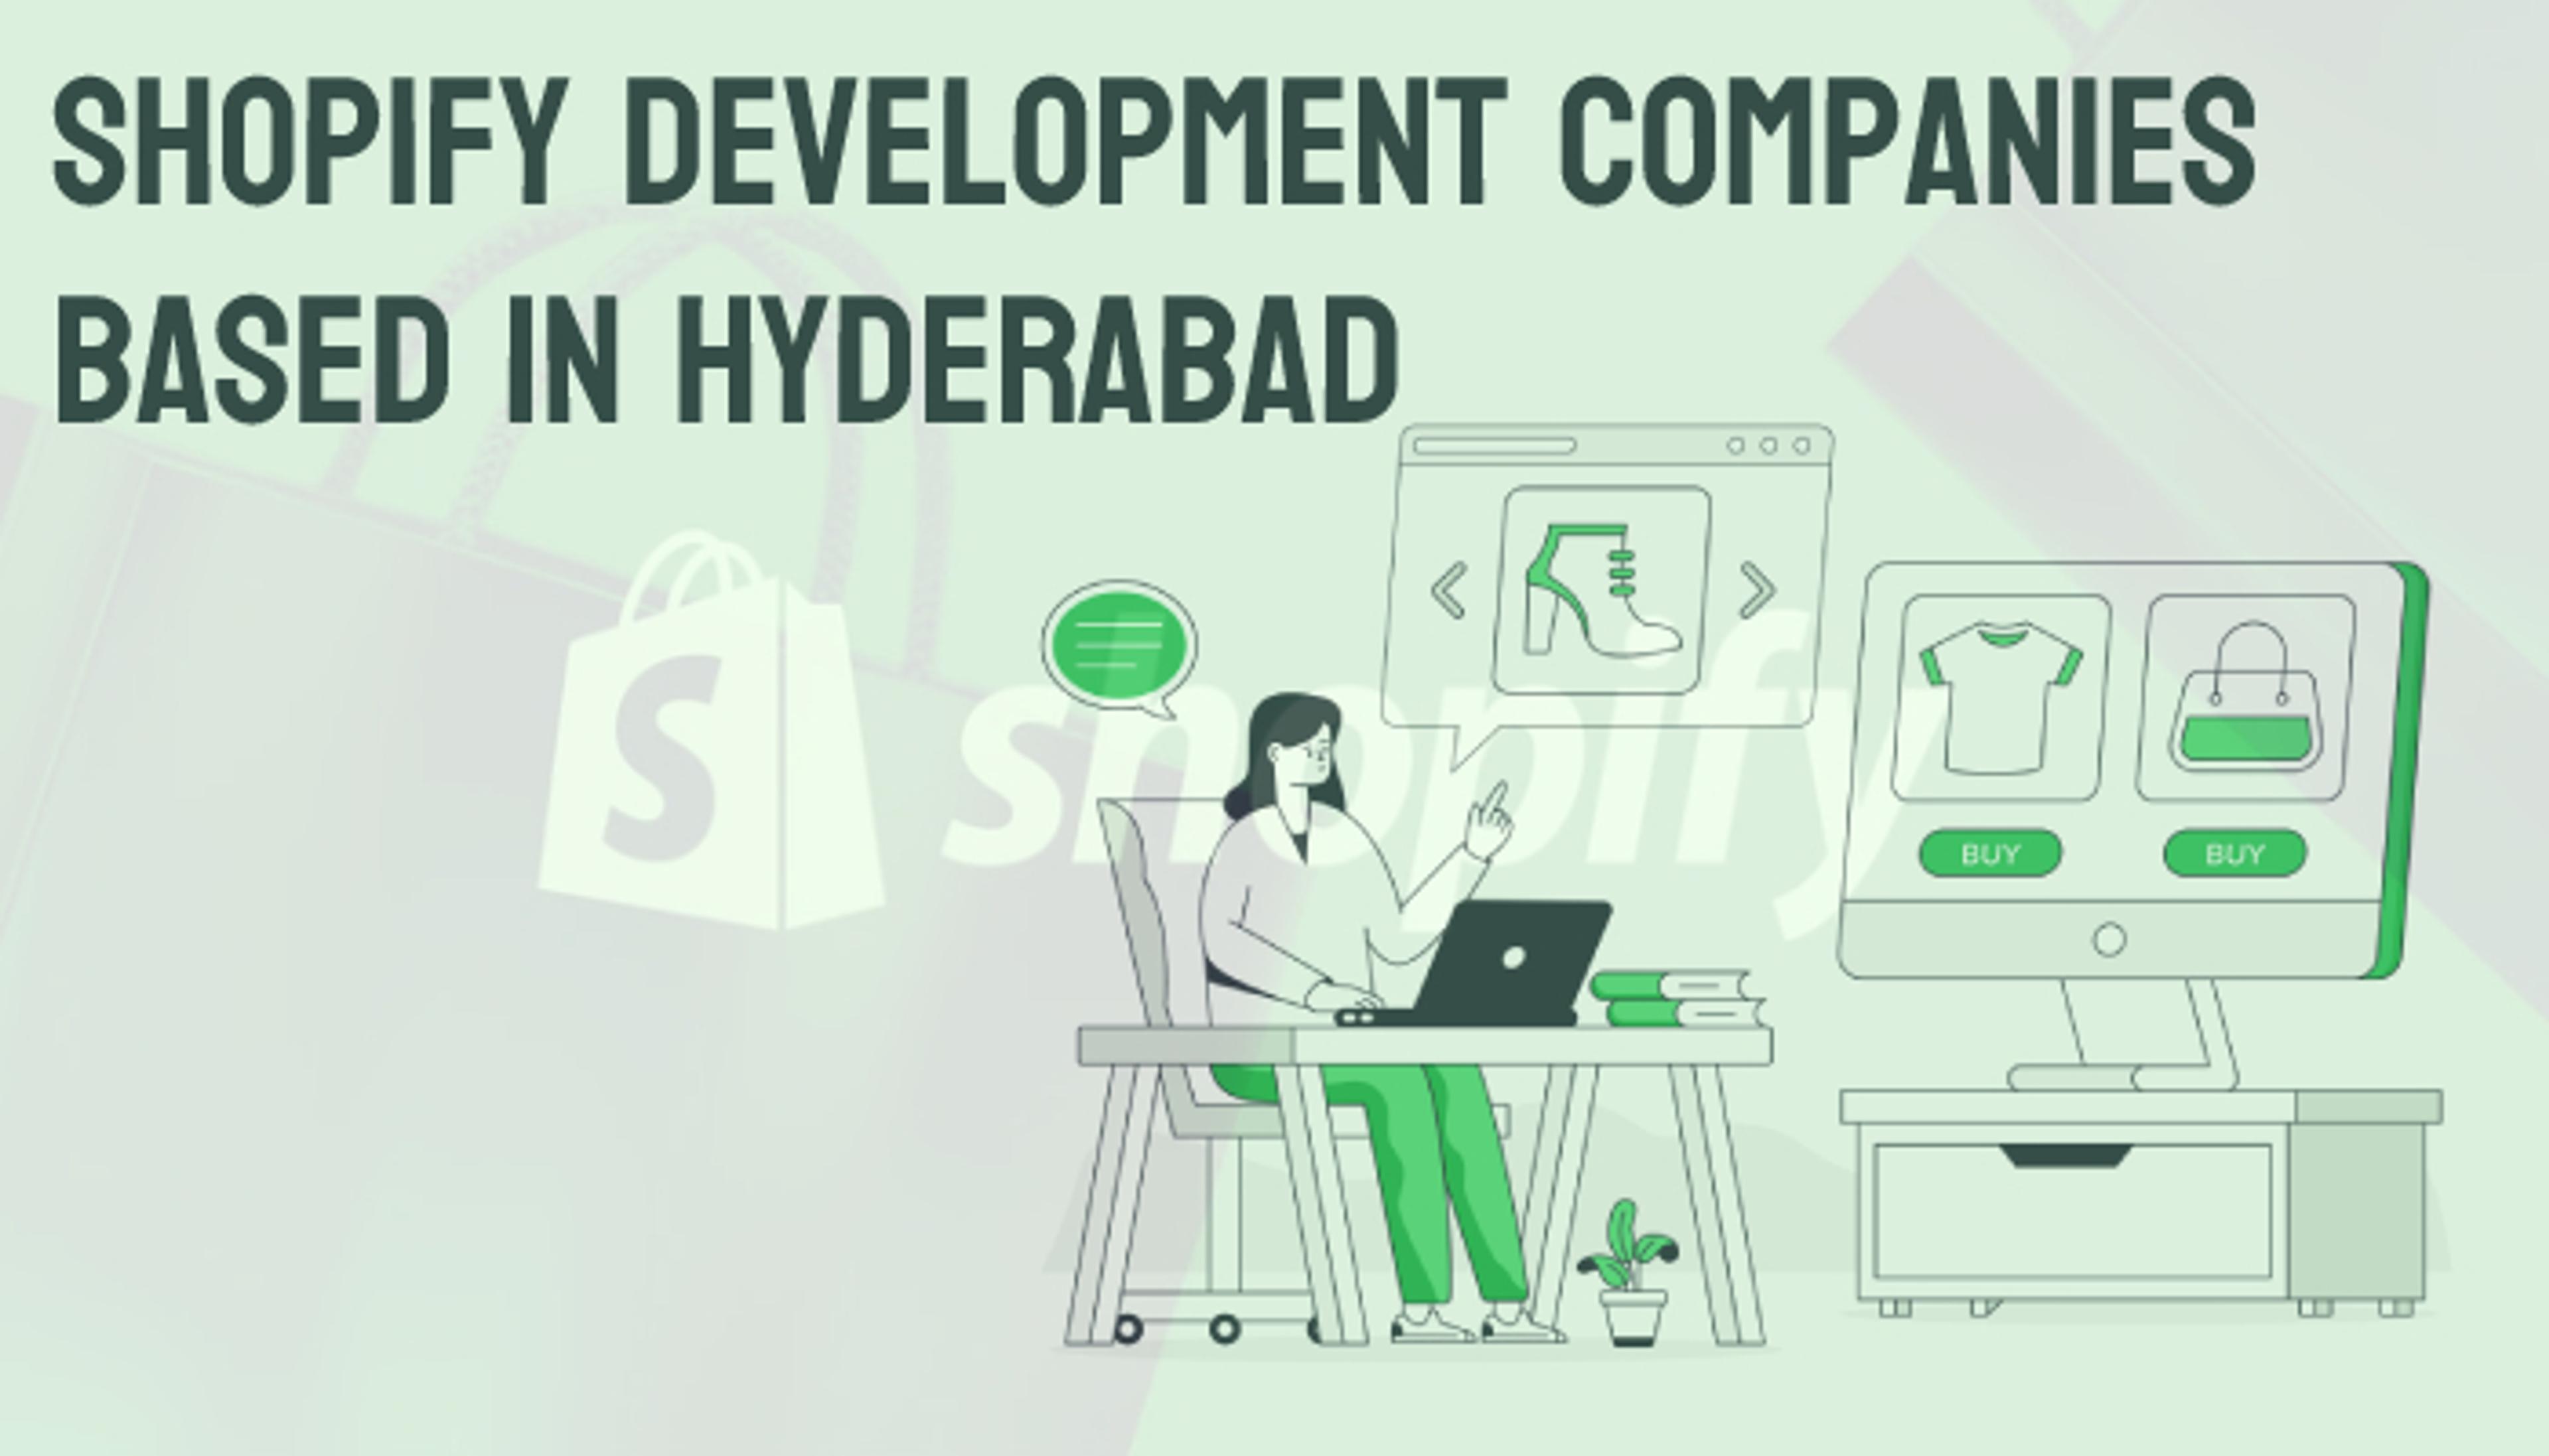 Shopify Development Companies Based In Hyderabad